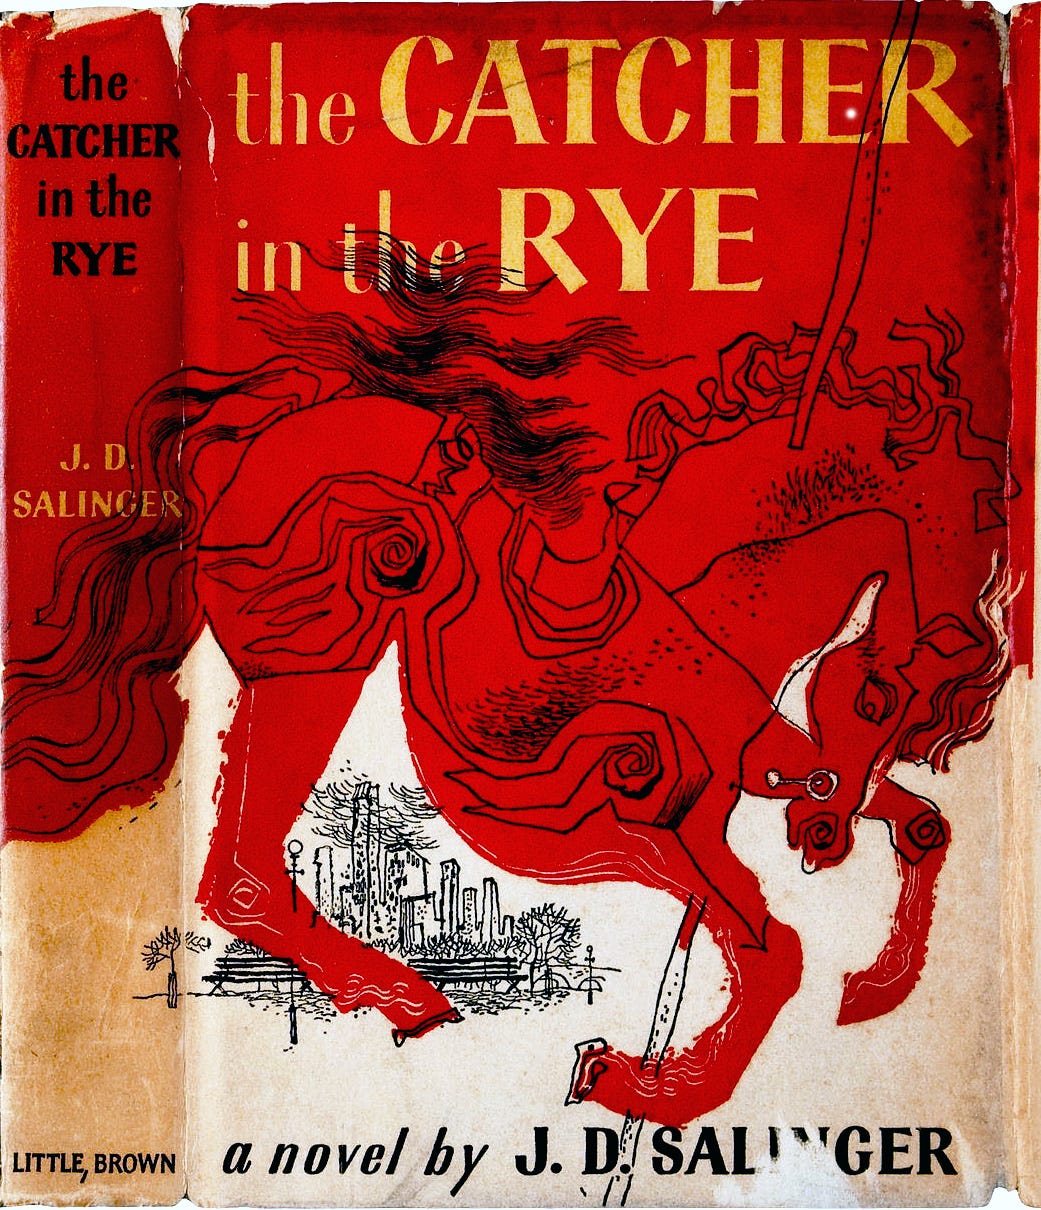 The Catcher in the Rye - Wikipedia